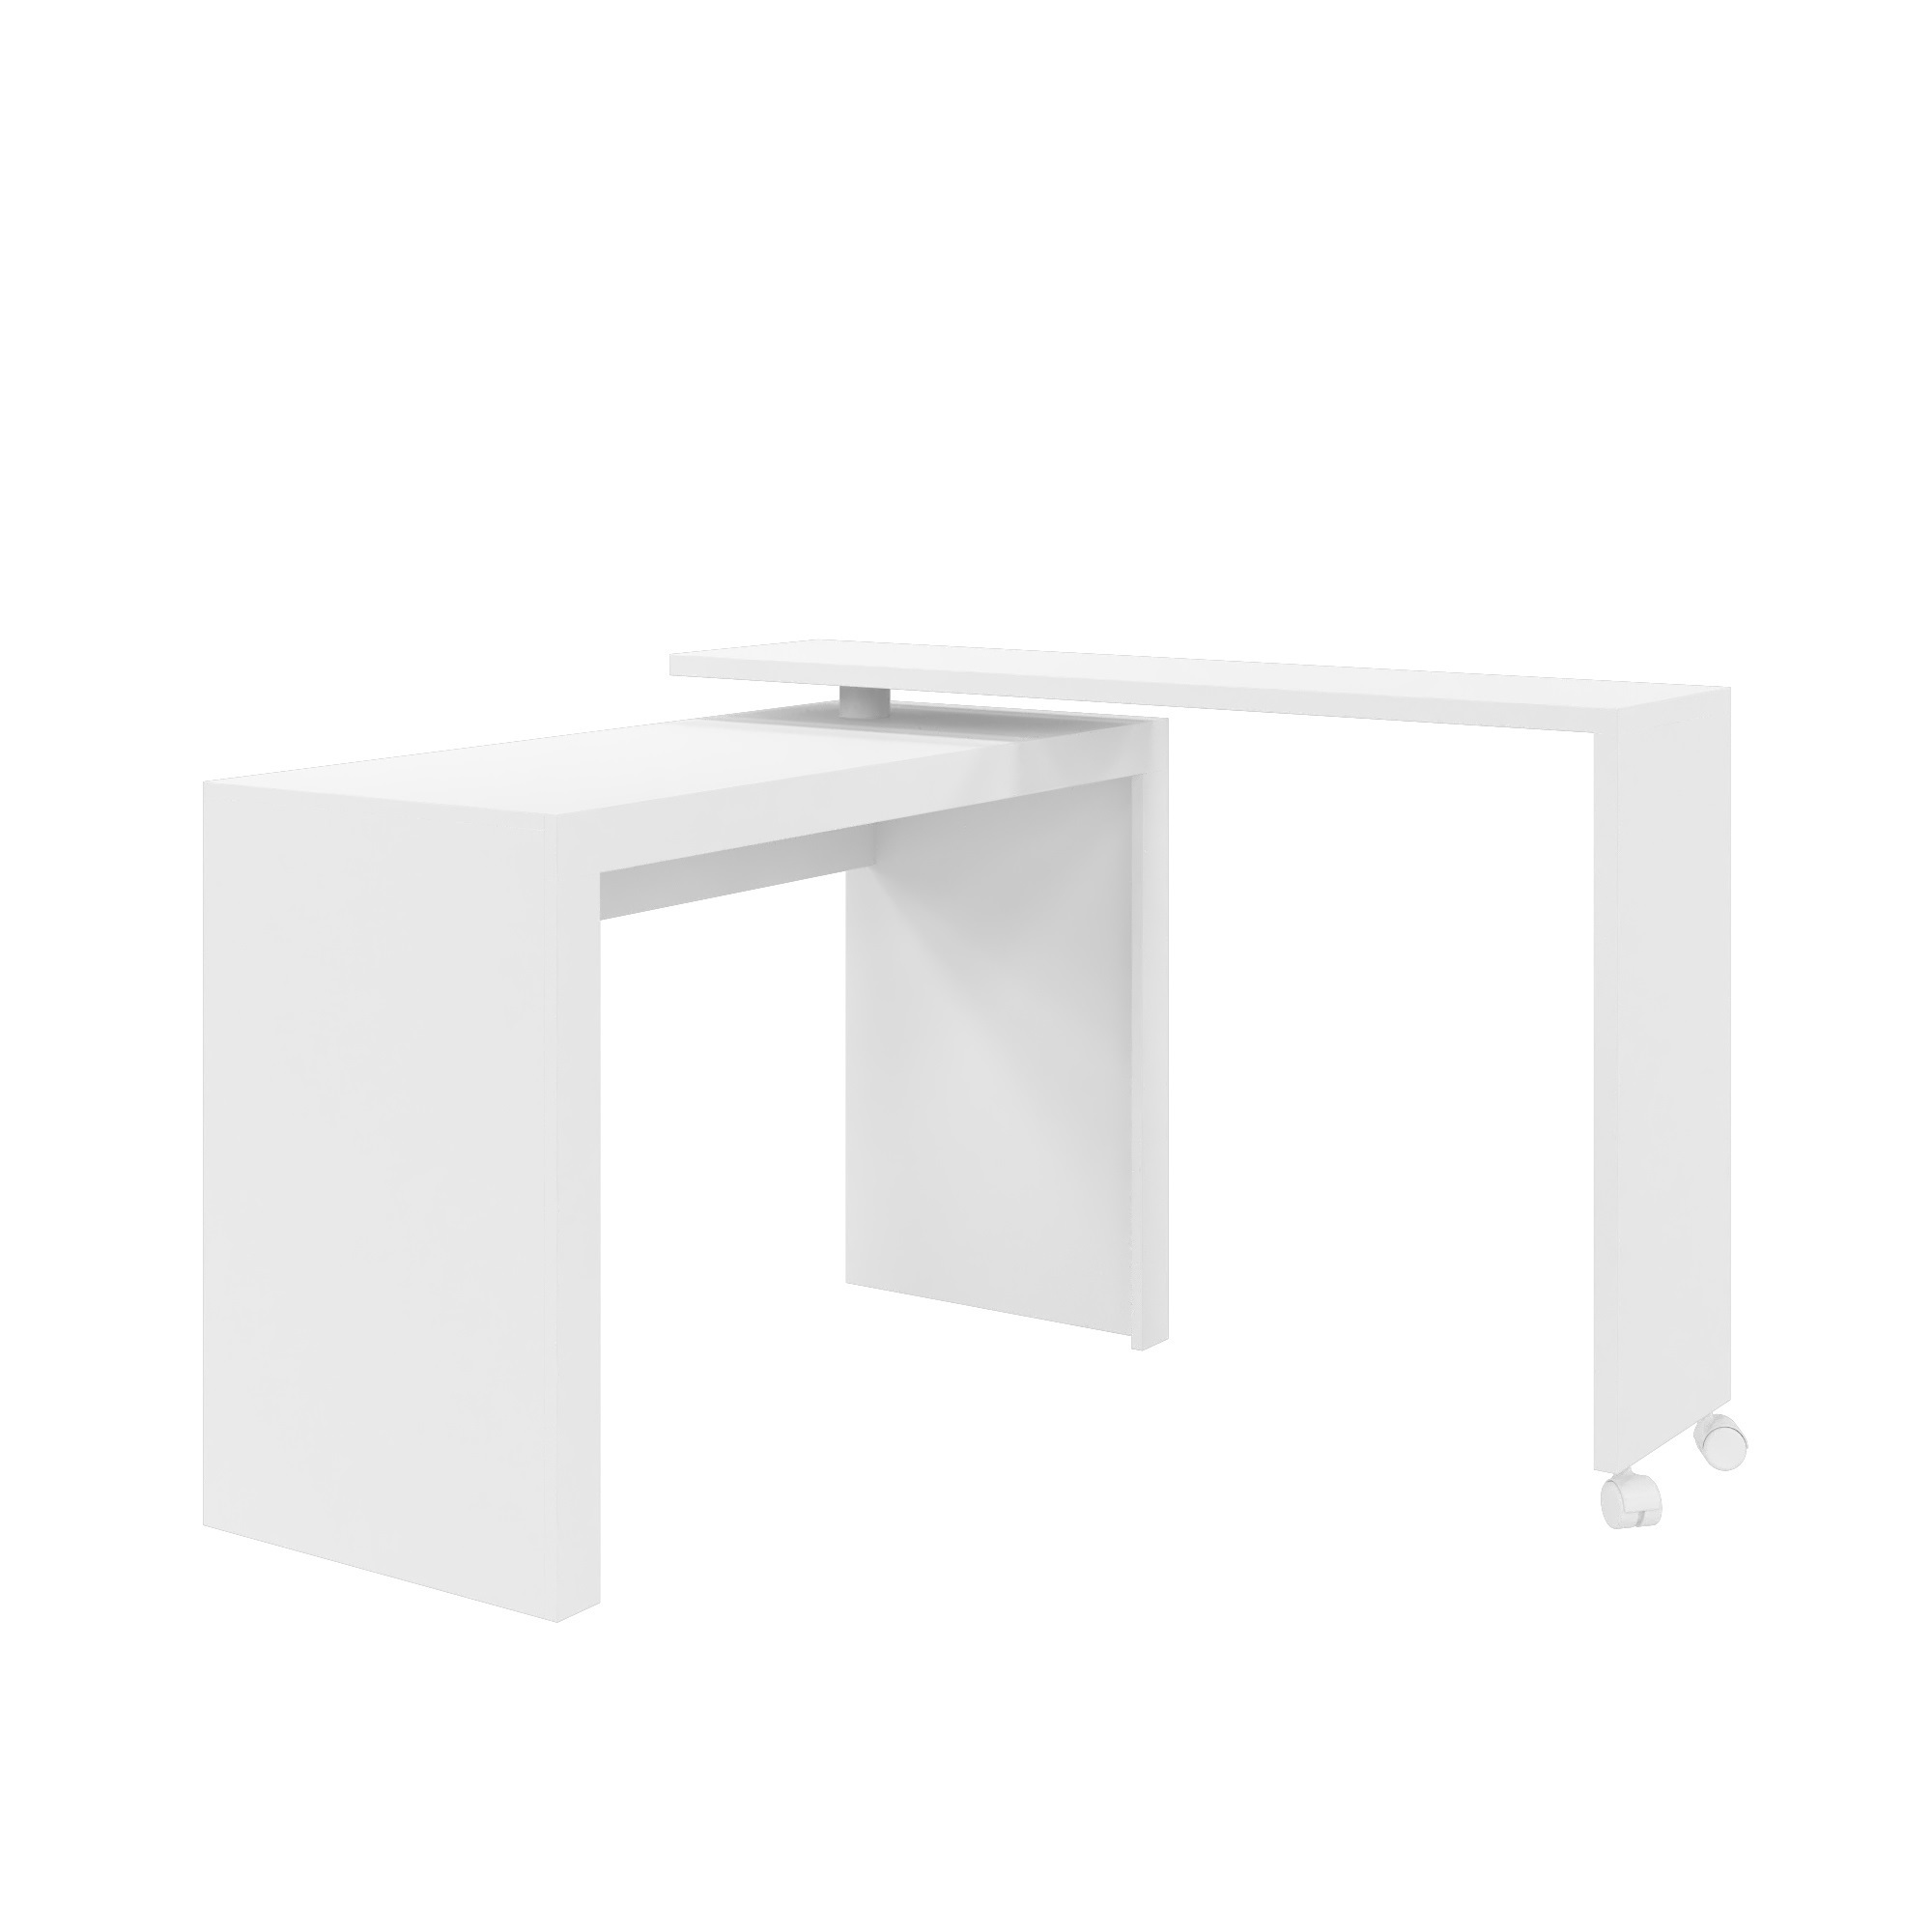 Manhattan Comfort, Calabria Nested Desk with swivel feature in White, Width 47.24 in, Height 32.09 in, Depth 18.11 in, Model 33AMC